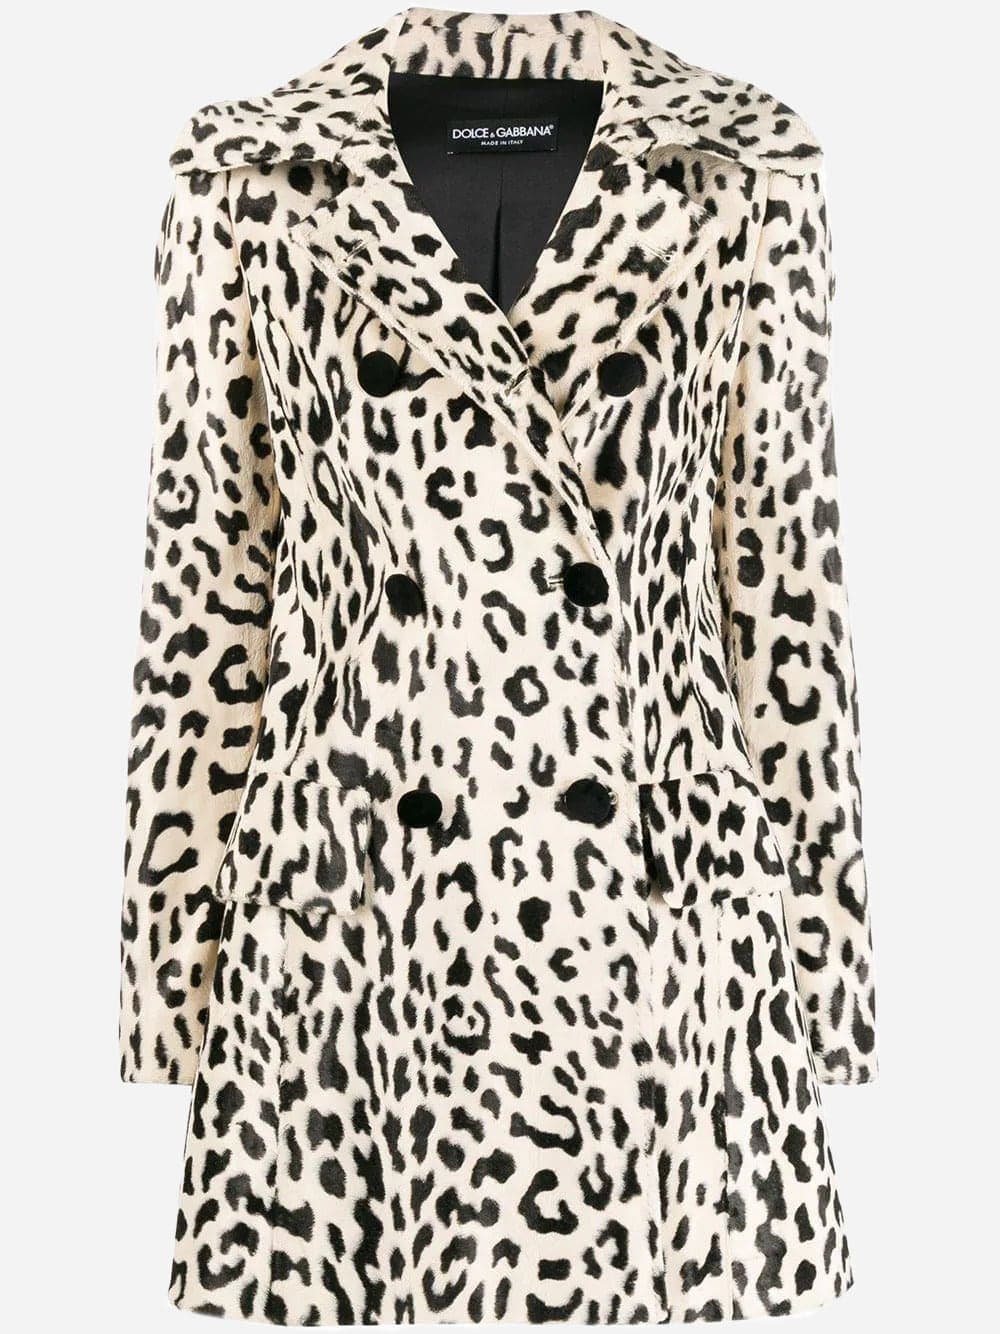 Dolce & Gabbana Leopard Print Double-Breasted Coat